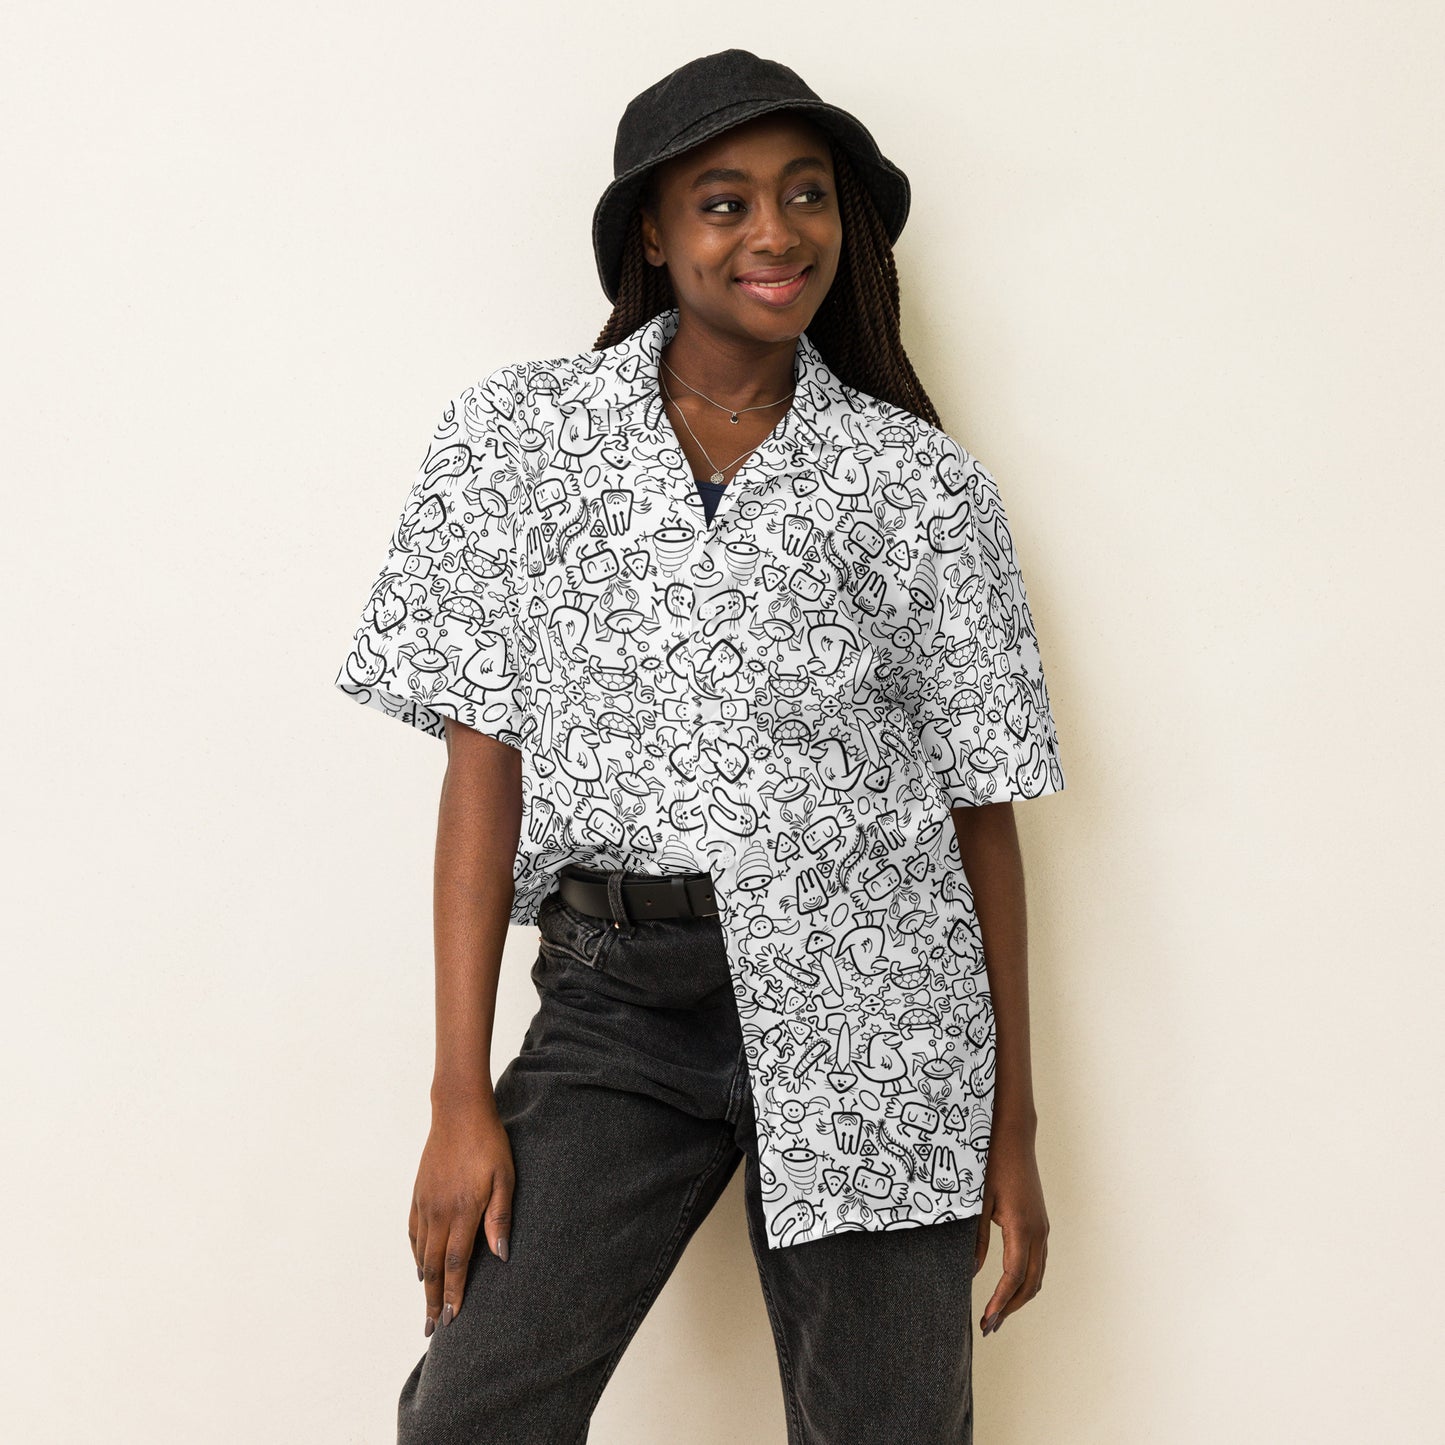 Cute doodles having great fun in a cool pattern - Unisex button shirt. Overview